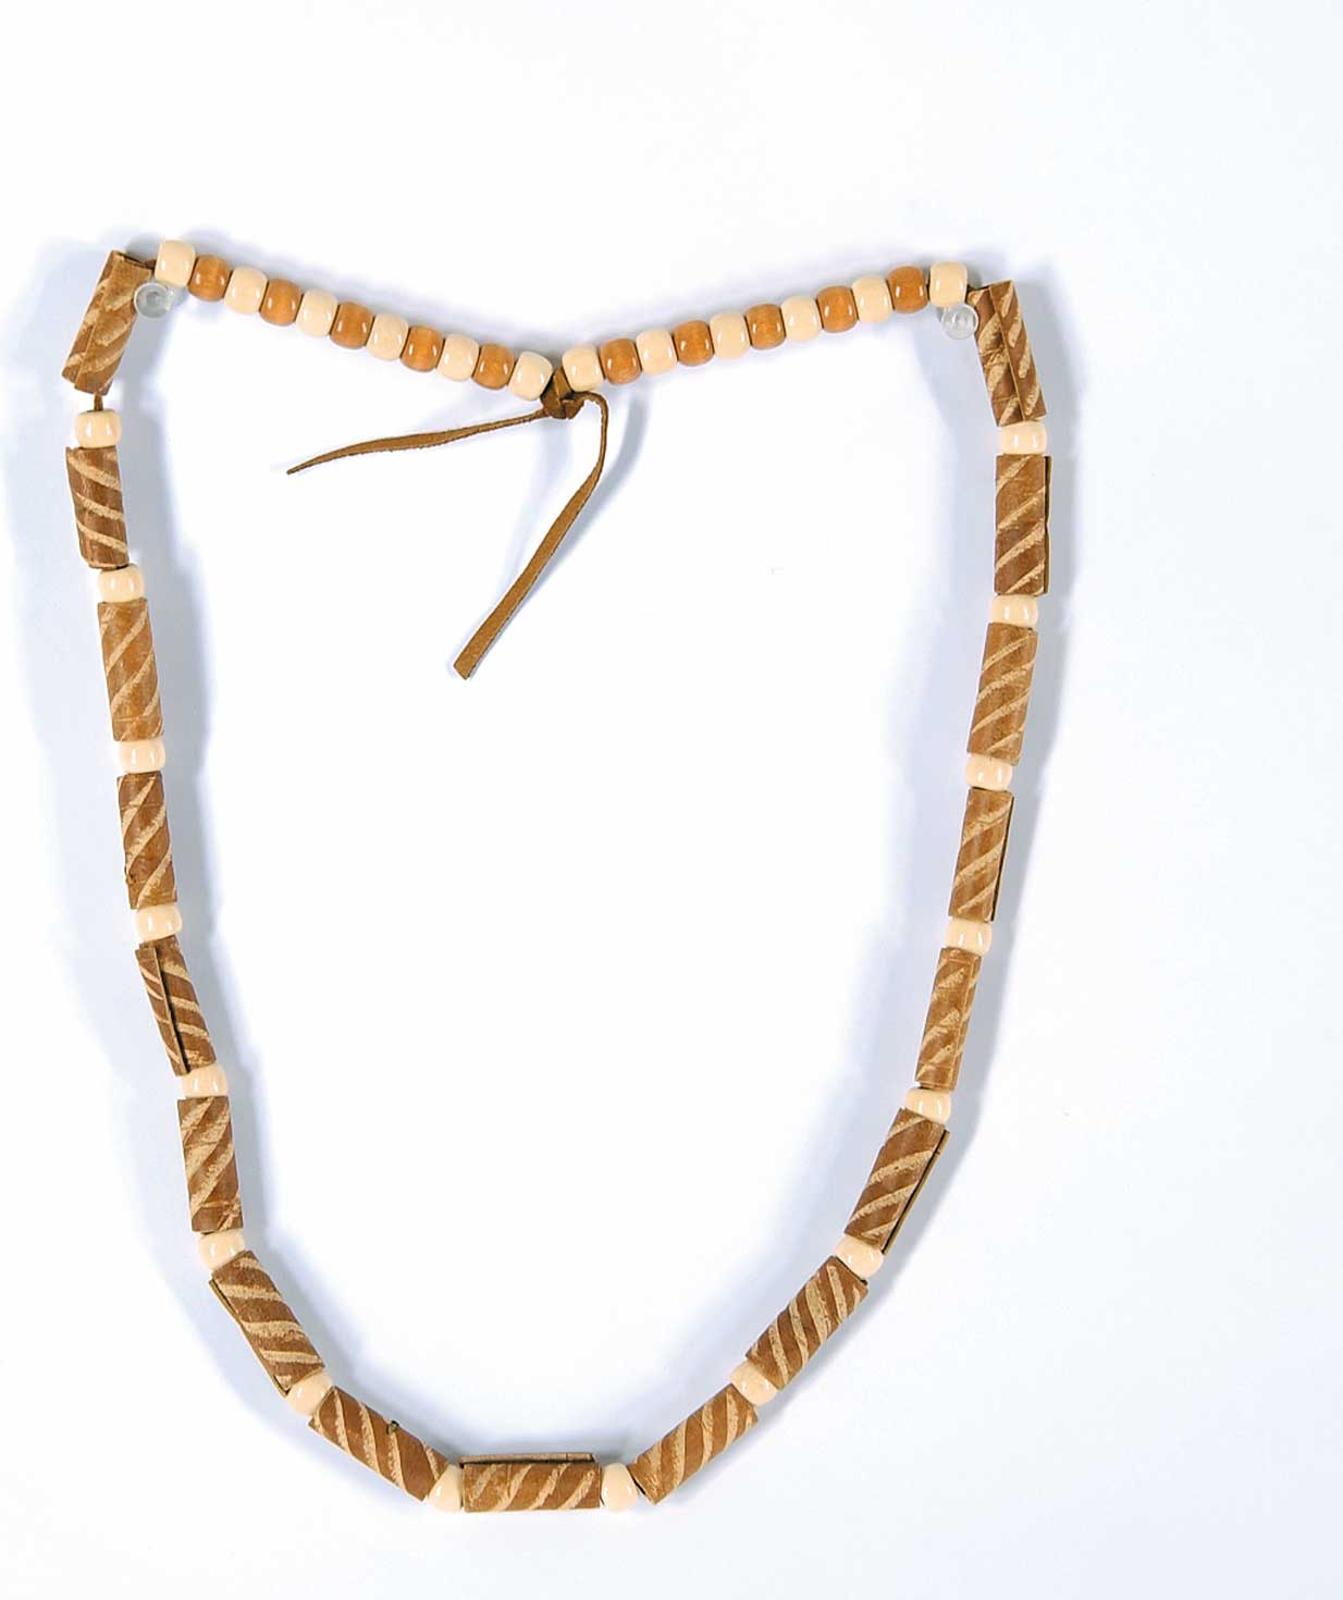 Robert Charles Aller (1922-2008) - Untitled - Birch Necklace with Spruce Dye and Wood Beads